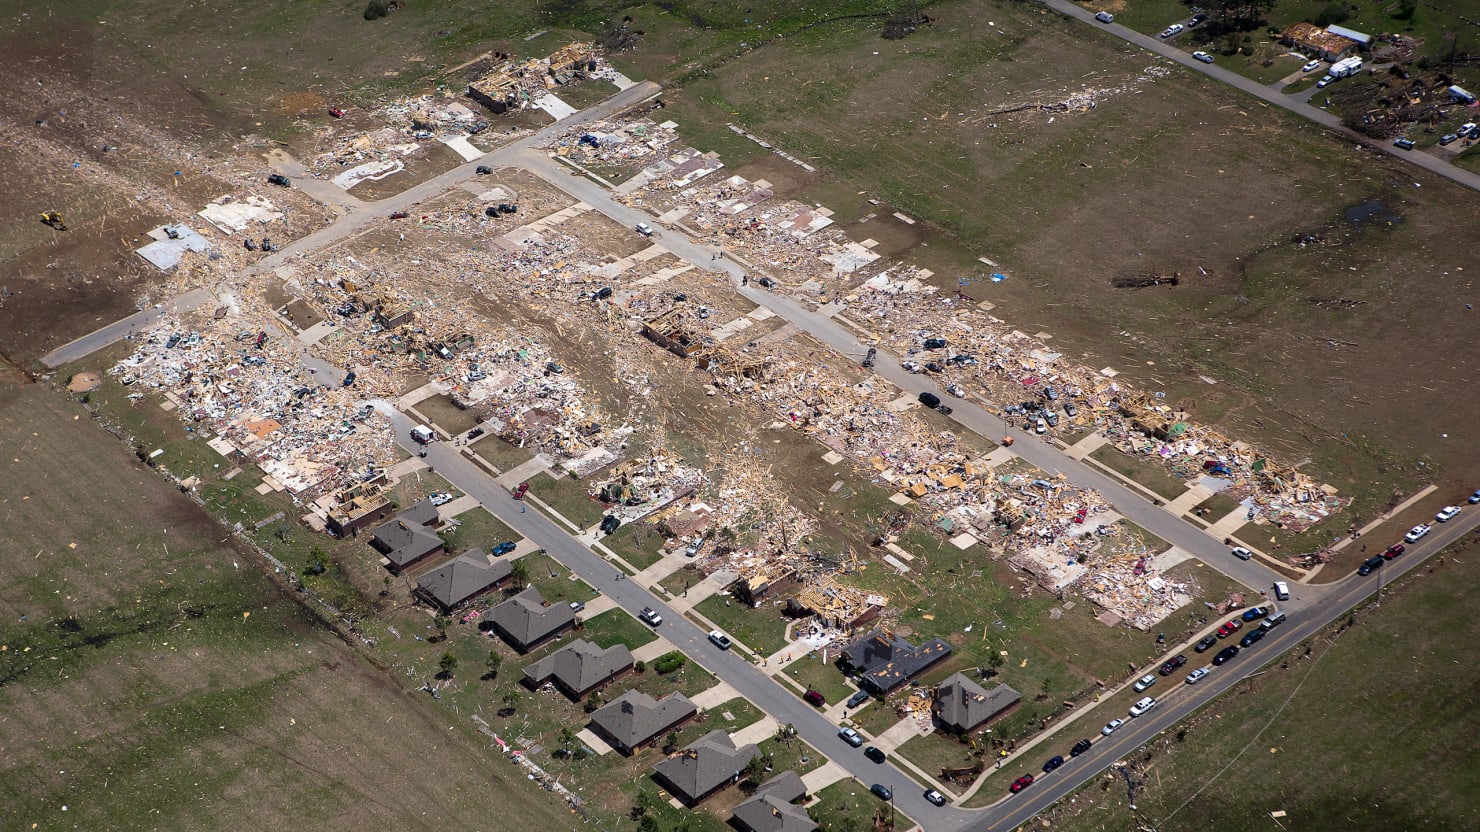 The Path of Destruction Tornadoes Left in the South (PHOTOS)